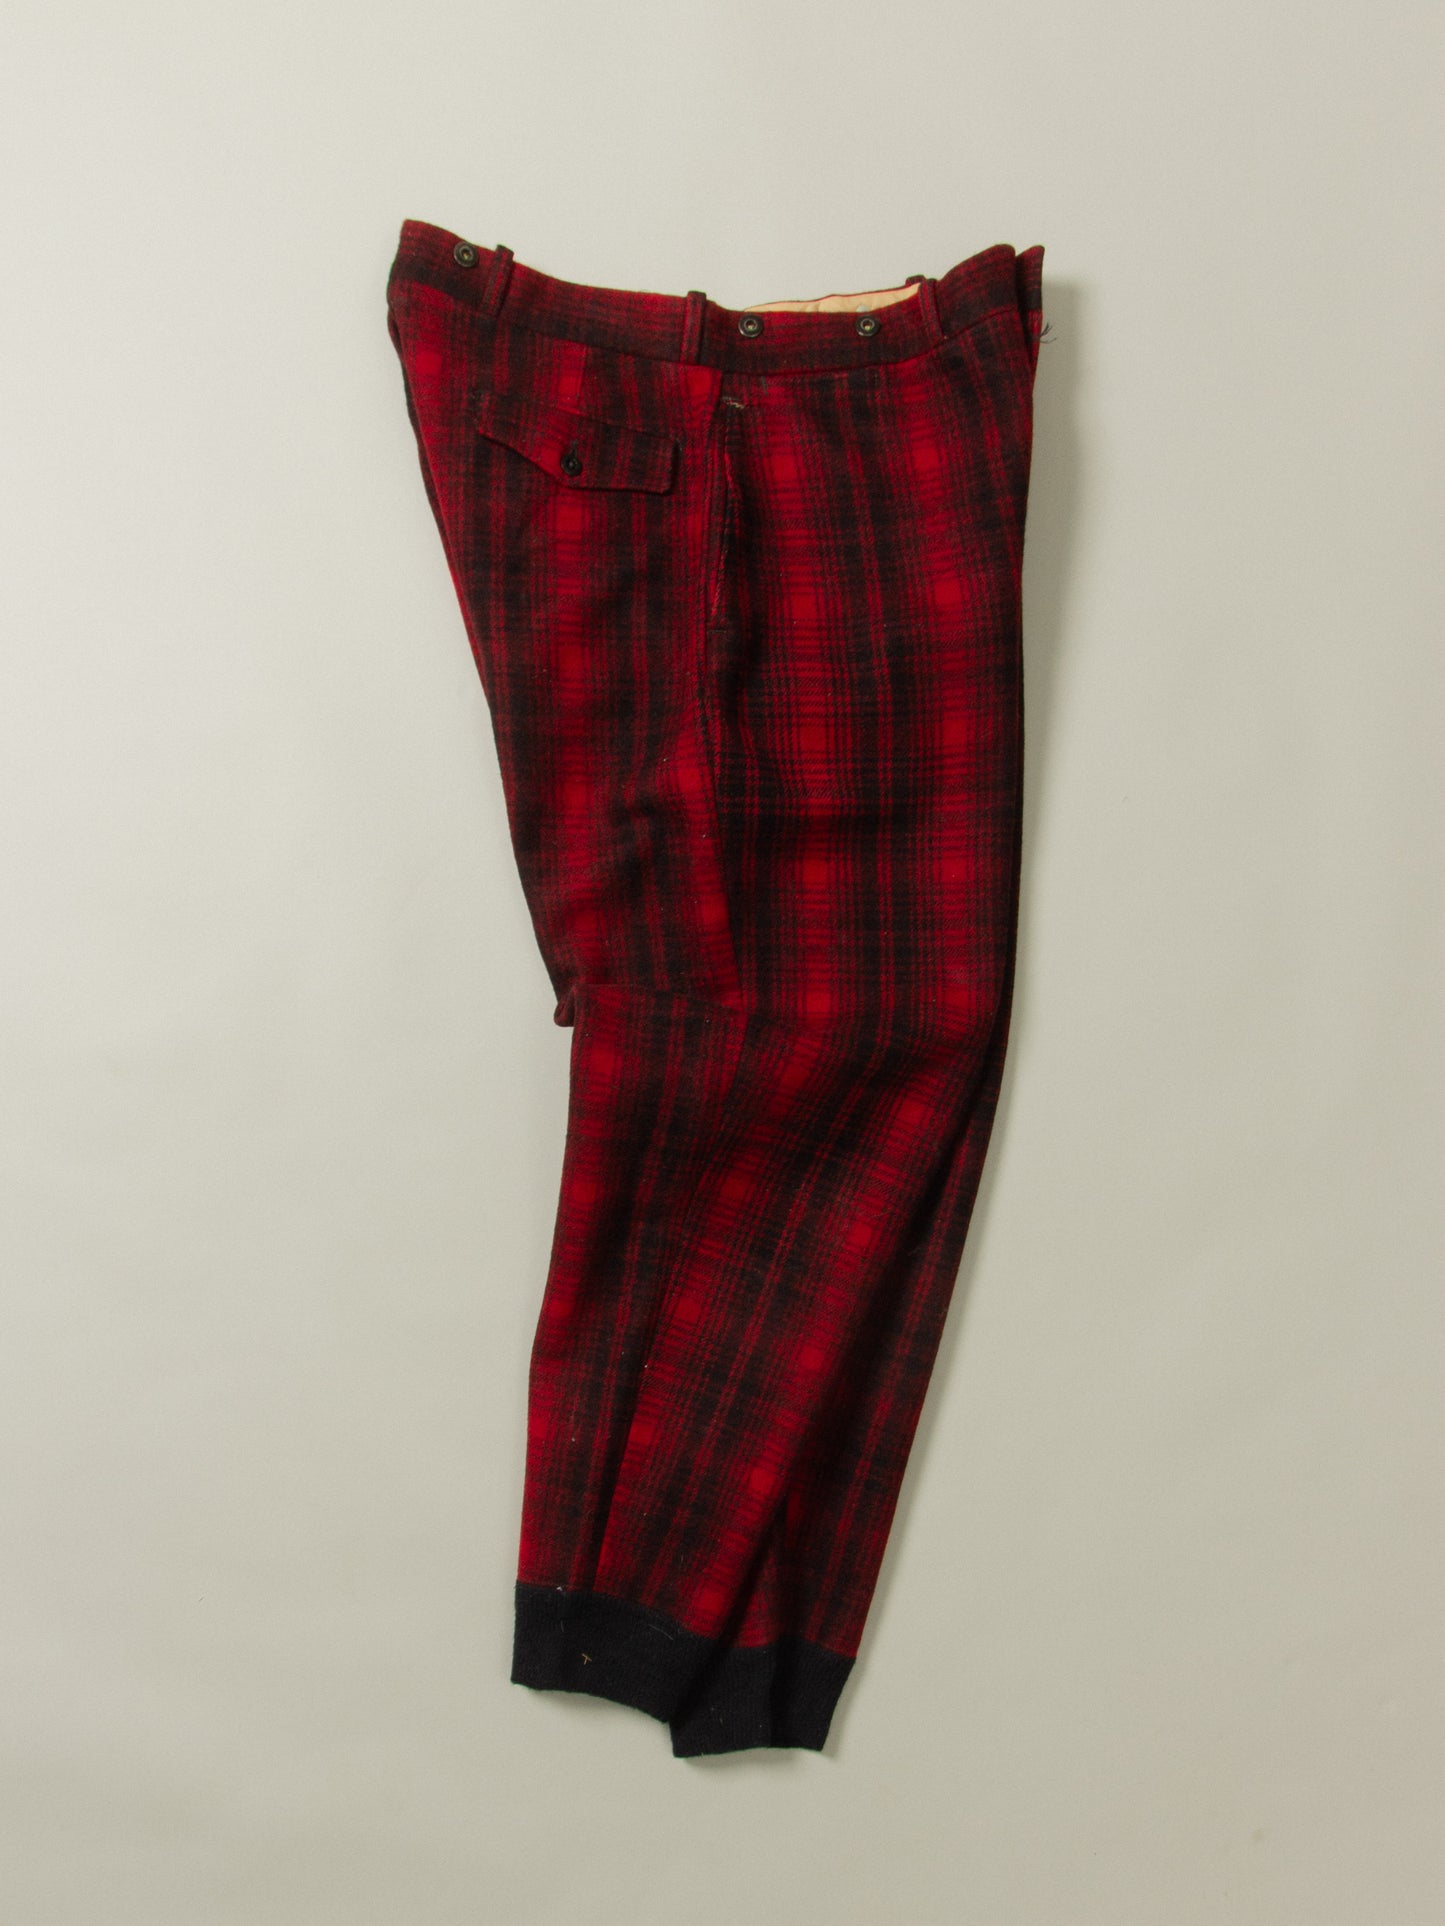 Vtg 1950s Woolrich Buffalo Plaid Trousers - Made in USA (38x31)